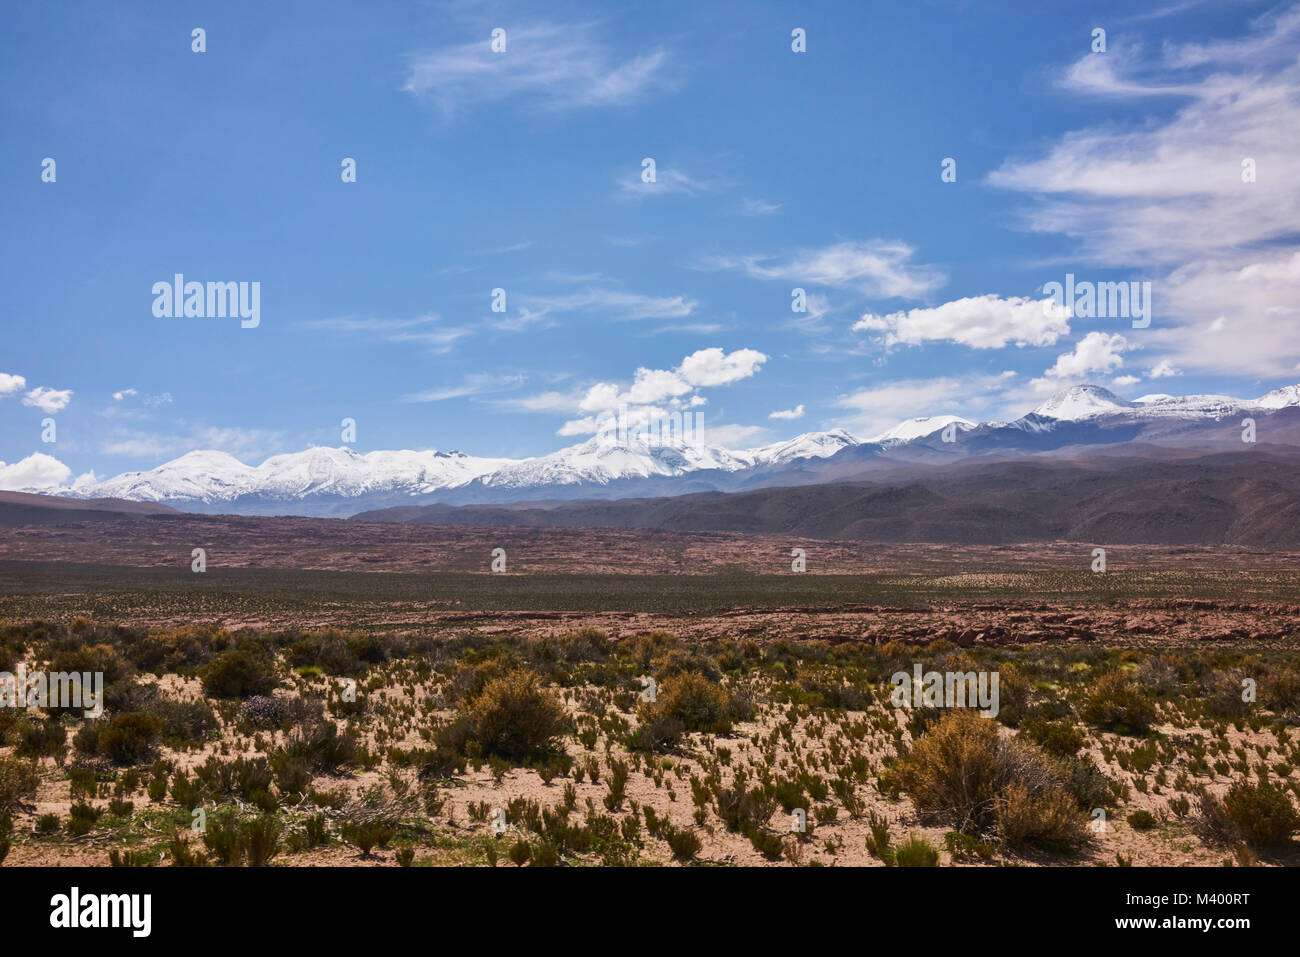 Arid landscape of the Atacama desert with the Andes Mountain range in the background. Stock Photo